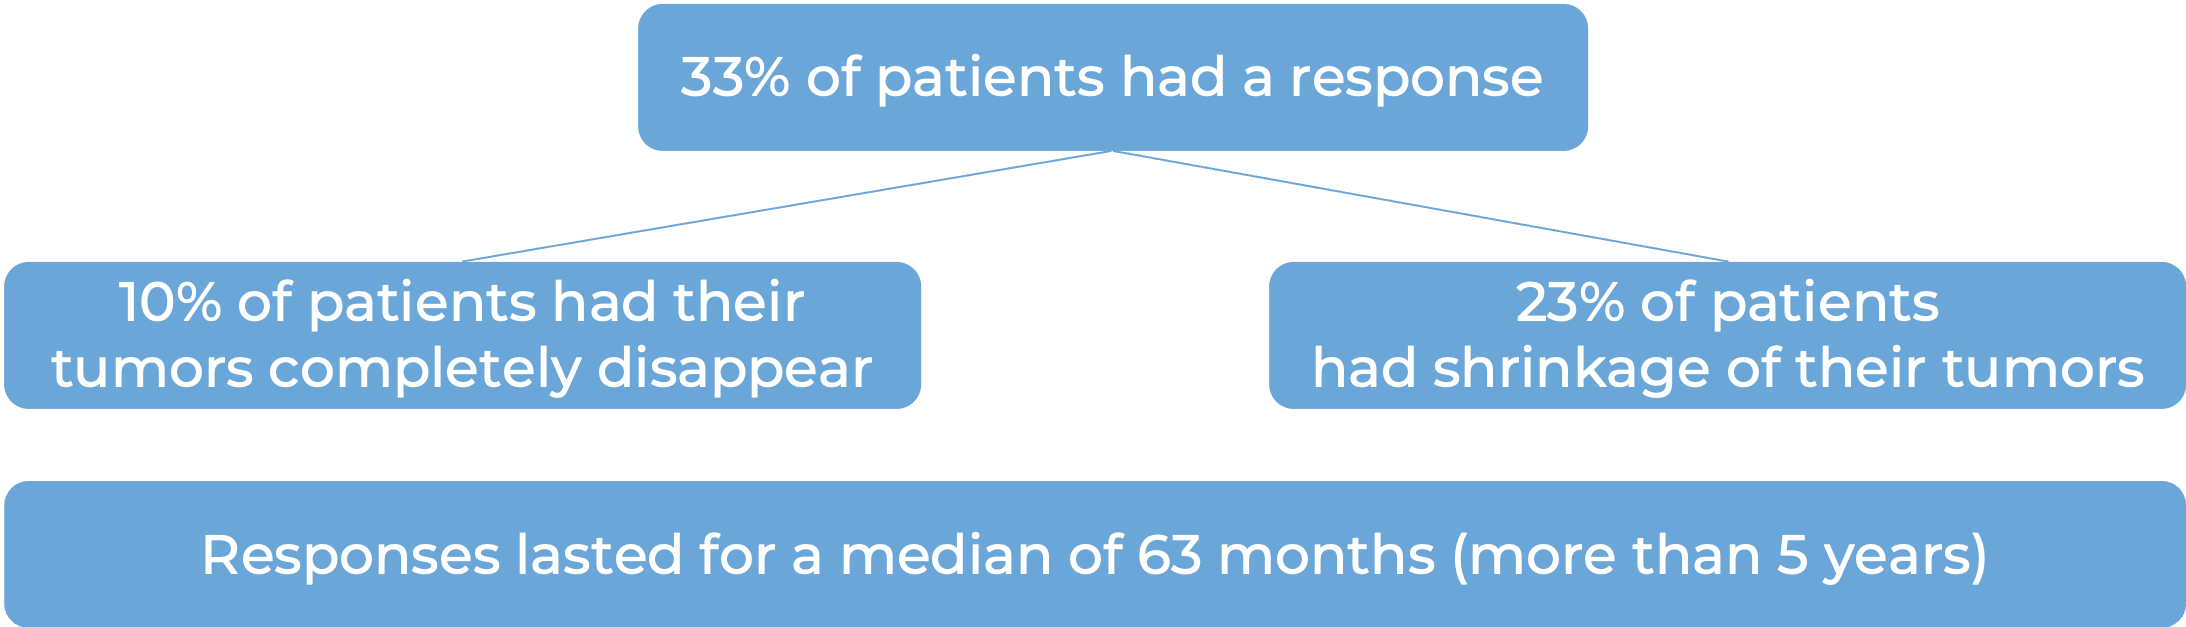 Results for 3 clinical trials where patients were treated with Keytruda (diagram)